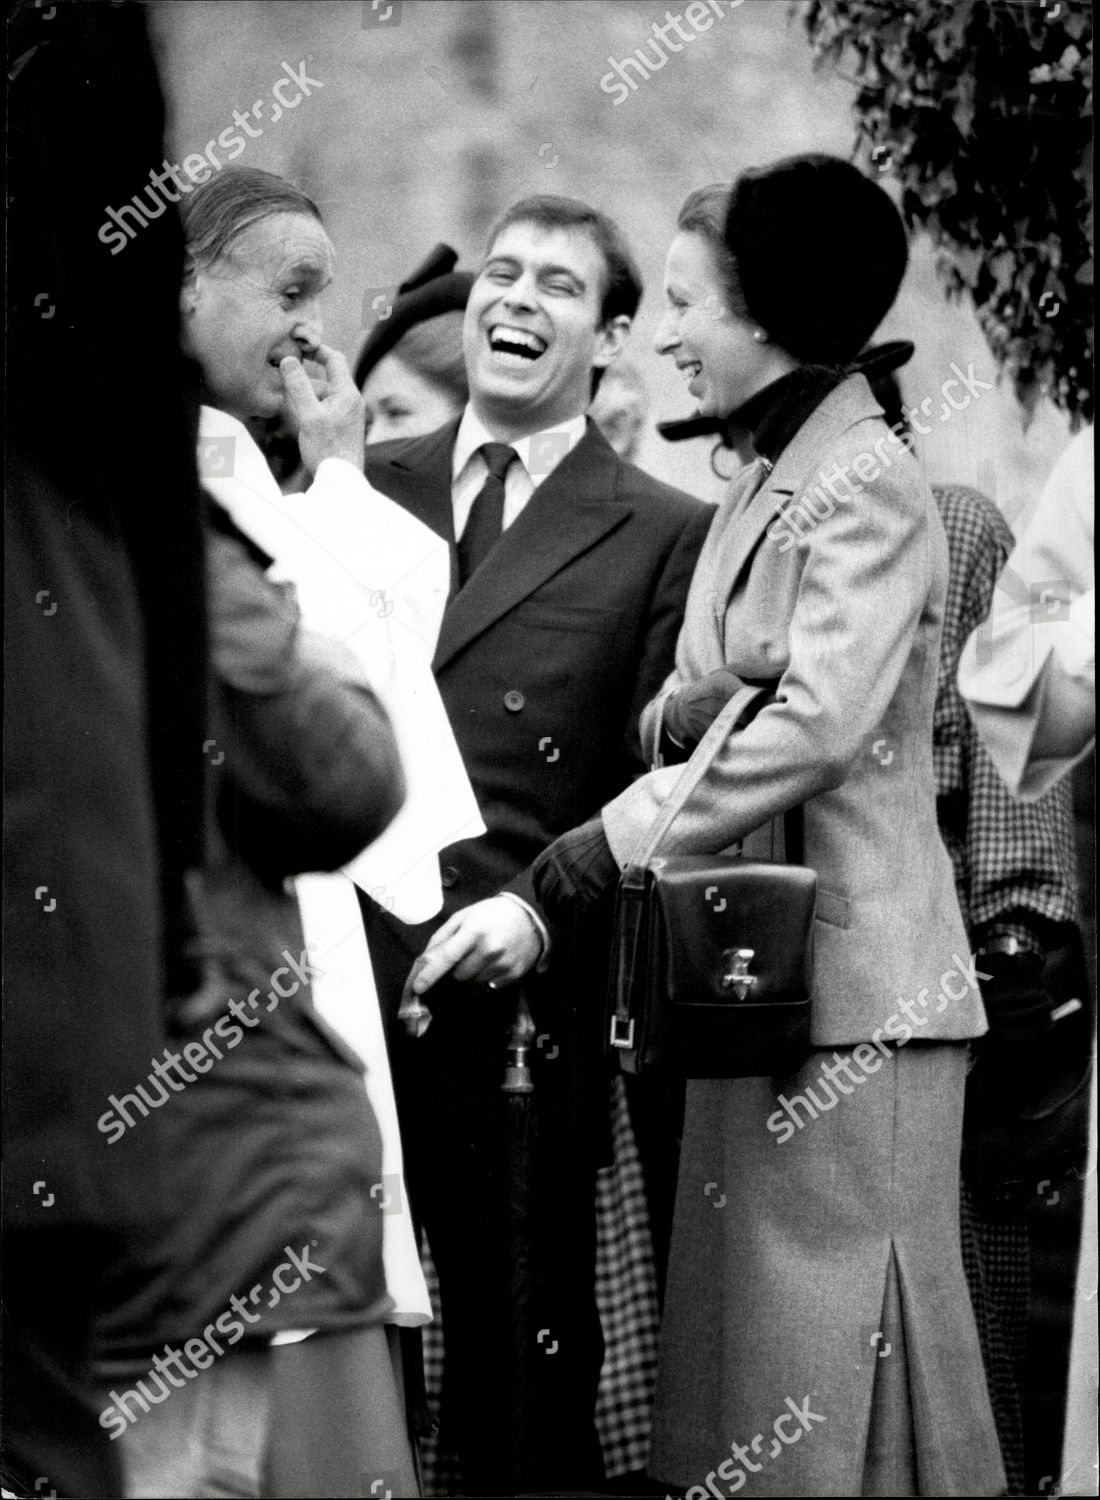 prince-andrew-duke-of-york-and-princess-anne-at-flitcham-chuch-sandringham-shutterstock-editorial-1396986a.jpg